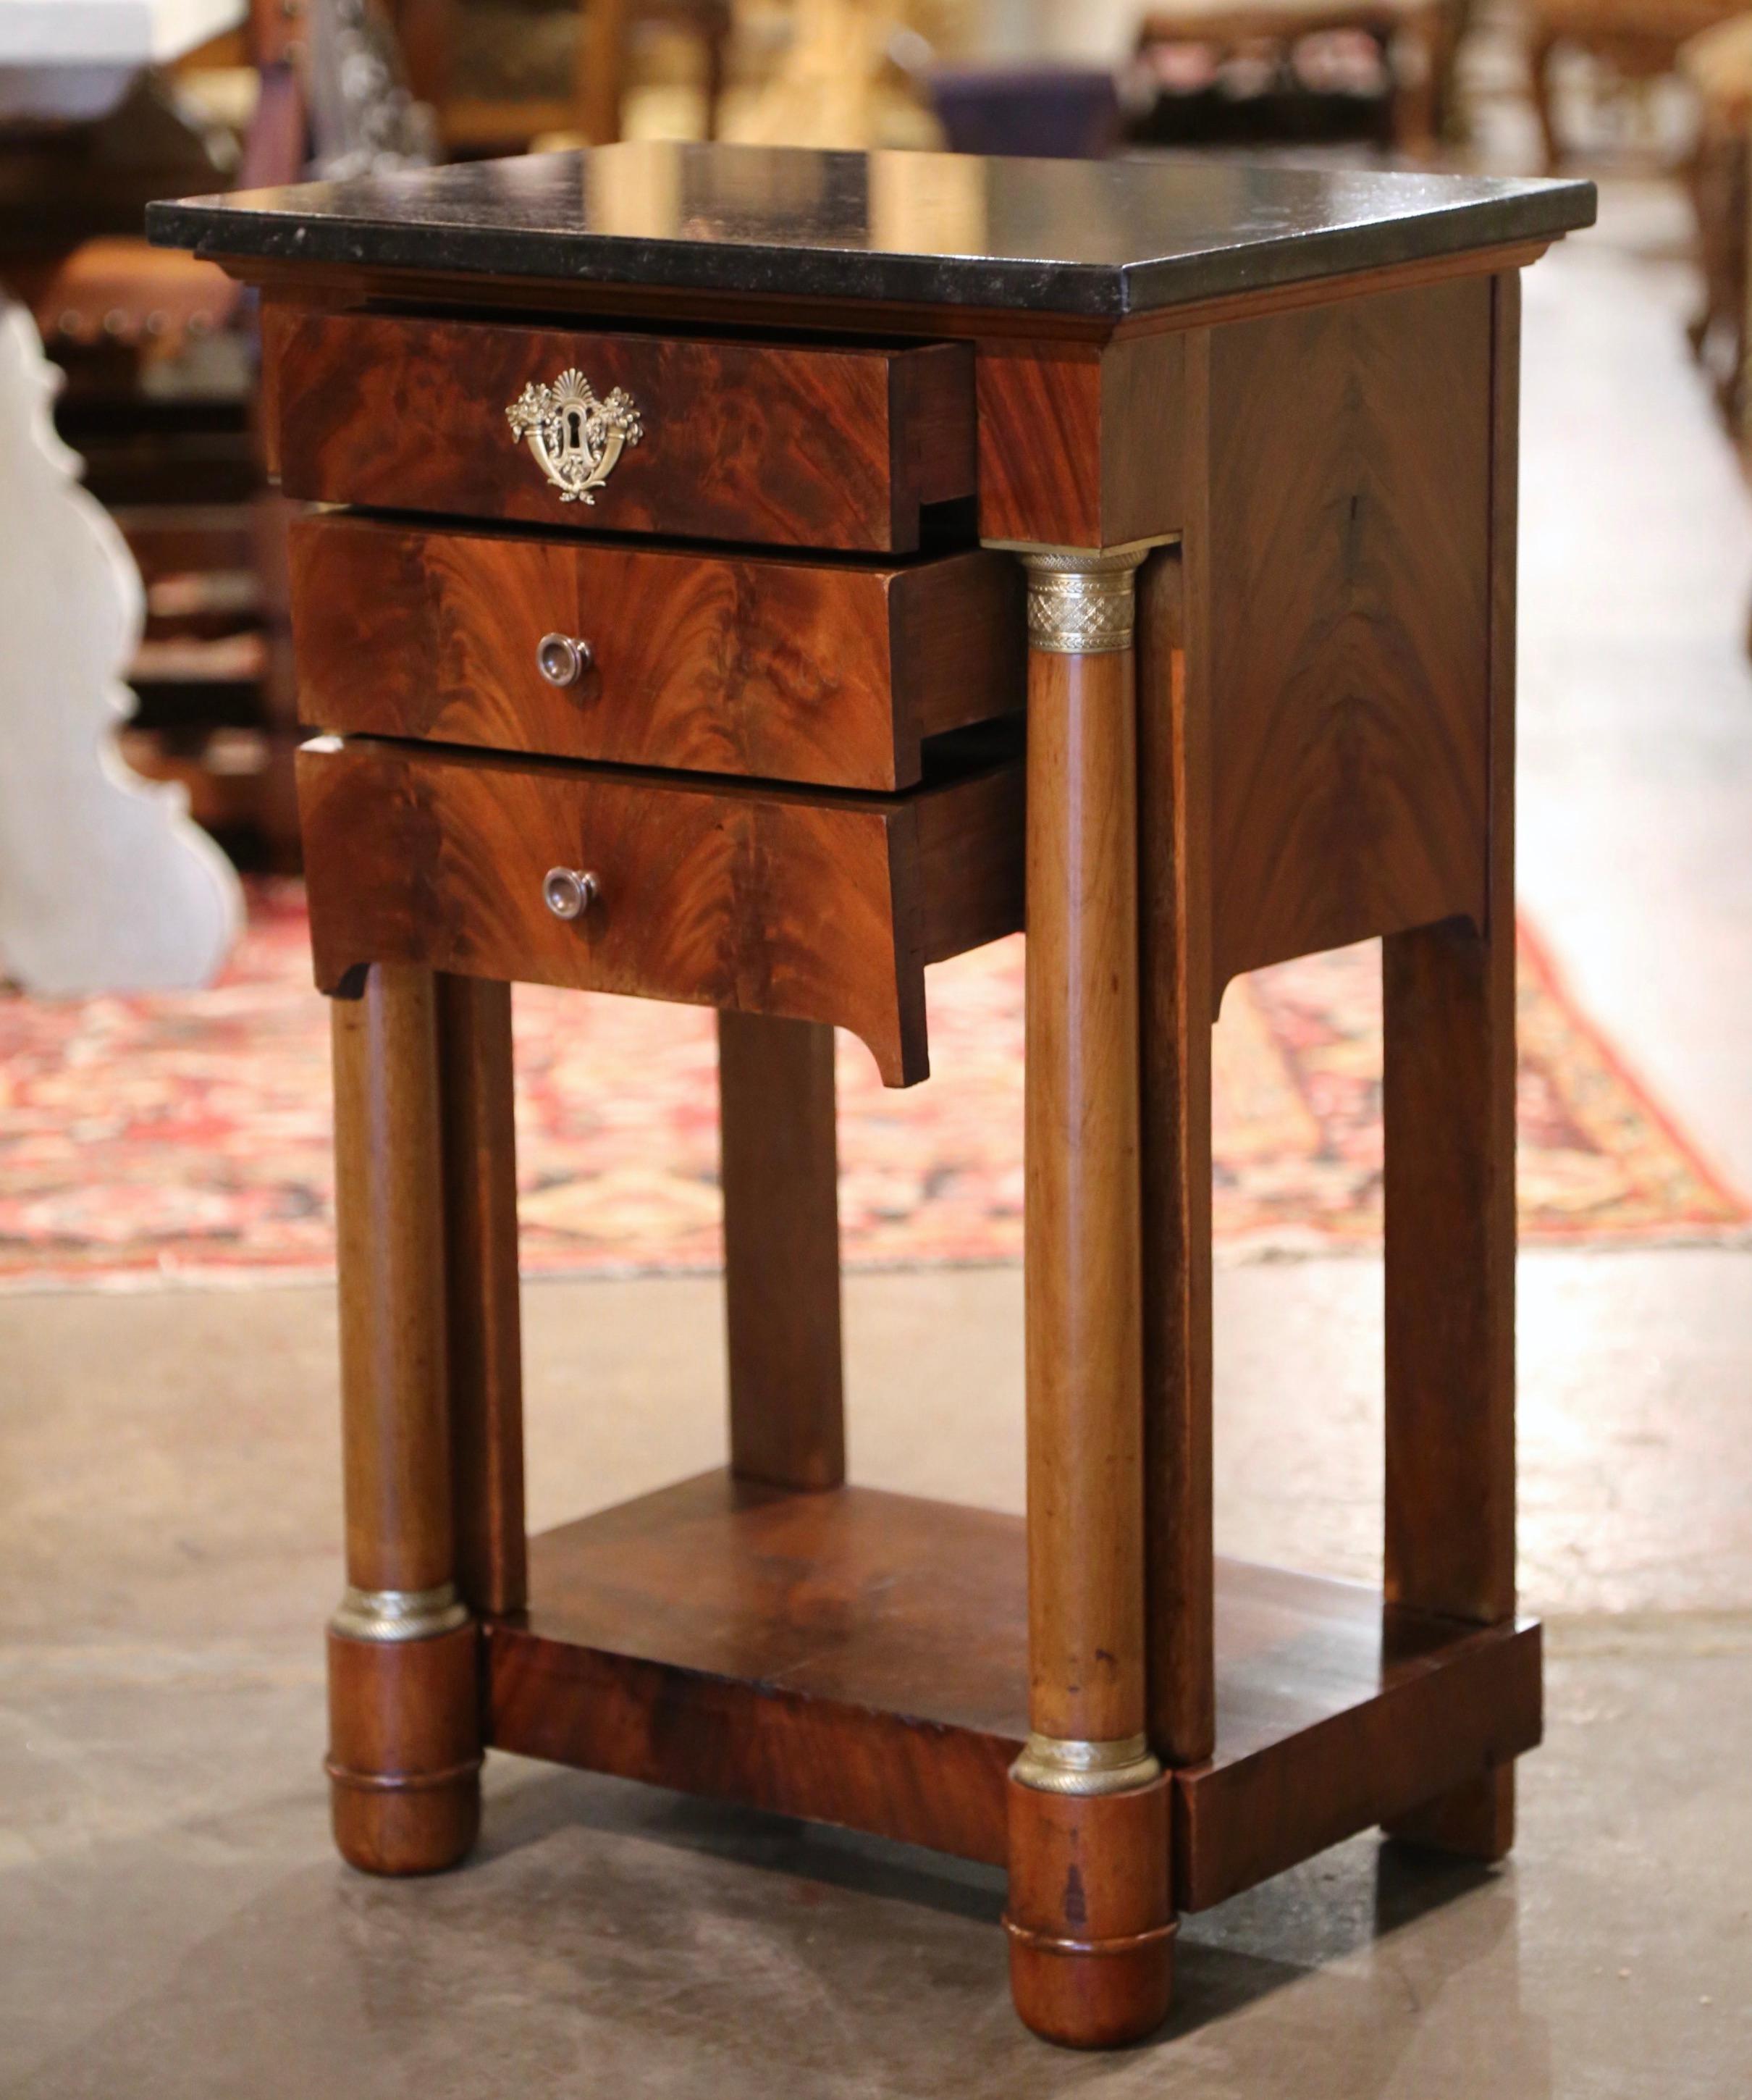 Mid-19th Century French Empire Mahogany and Marble Bedside Table with Drawers 4